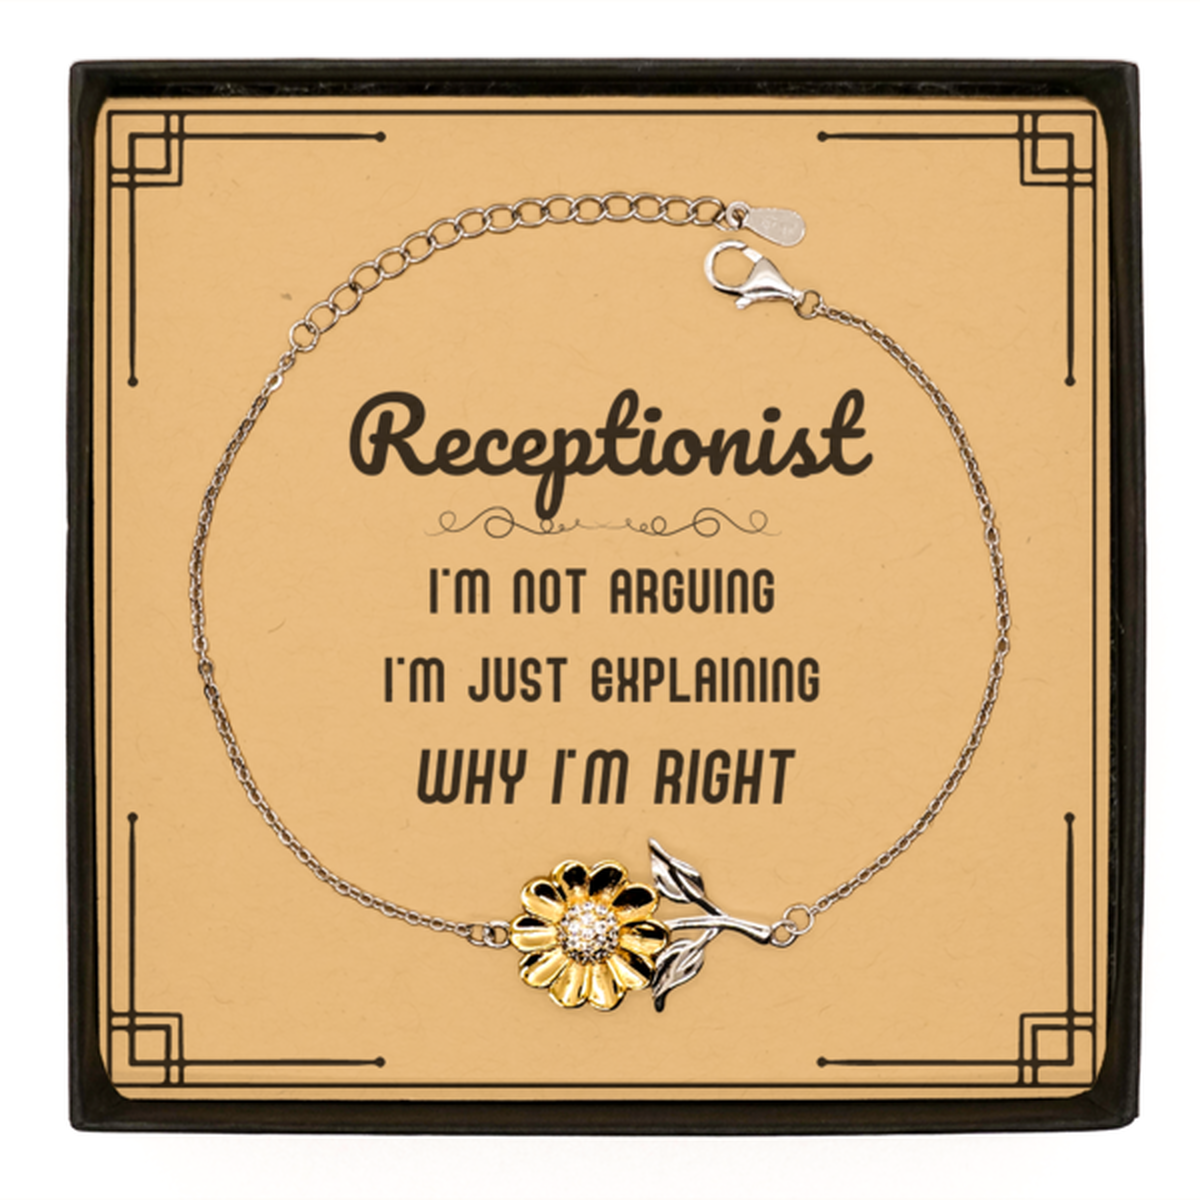 Receptionist I'm not Arguing. I'm Just Explaining Why I'm RIGHT Sunflower Bracelet, Funny Saying Quote Receptionist Gifts For Receptionist Message Card Graduation Birthday Christmas Gifts for Men Women Coworker